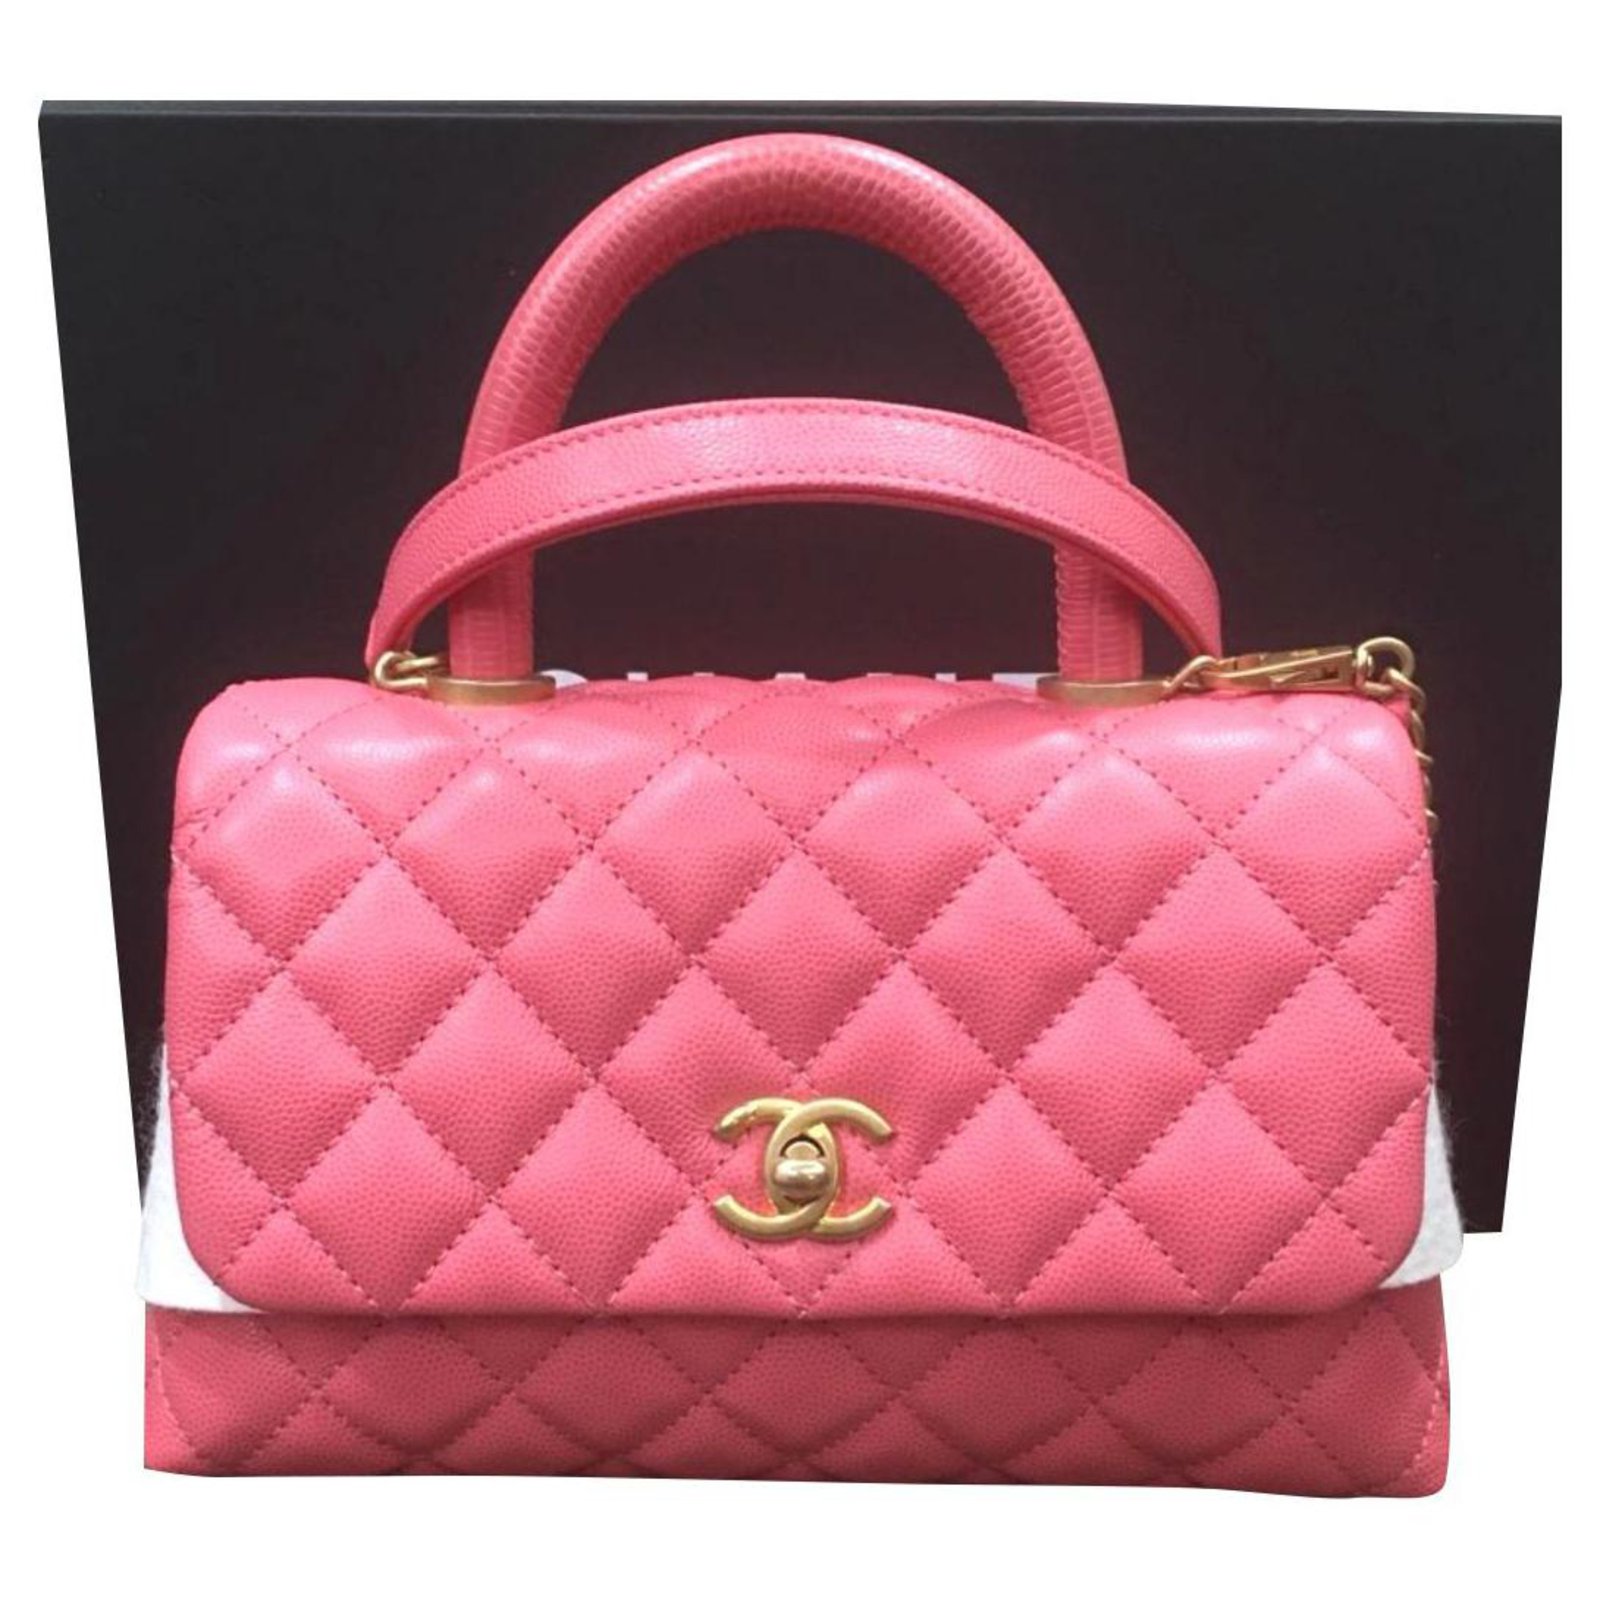 Chanel Small pink Coco Handle bag GHW